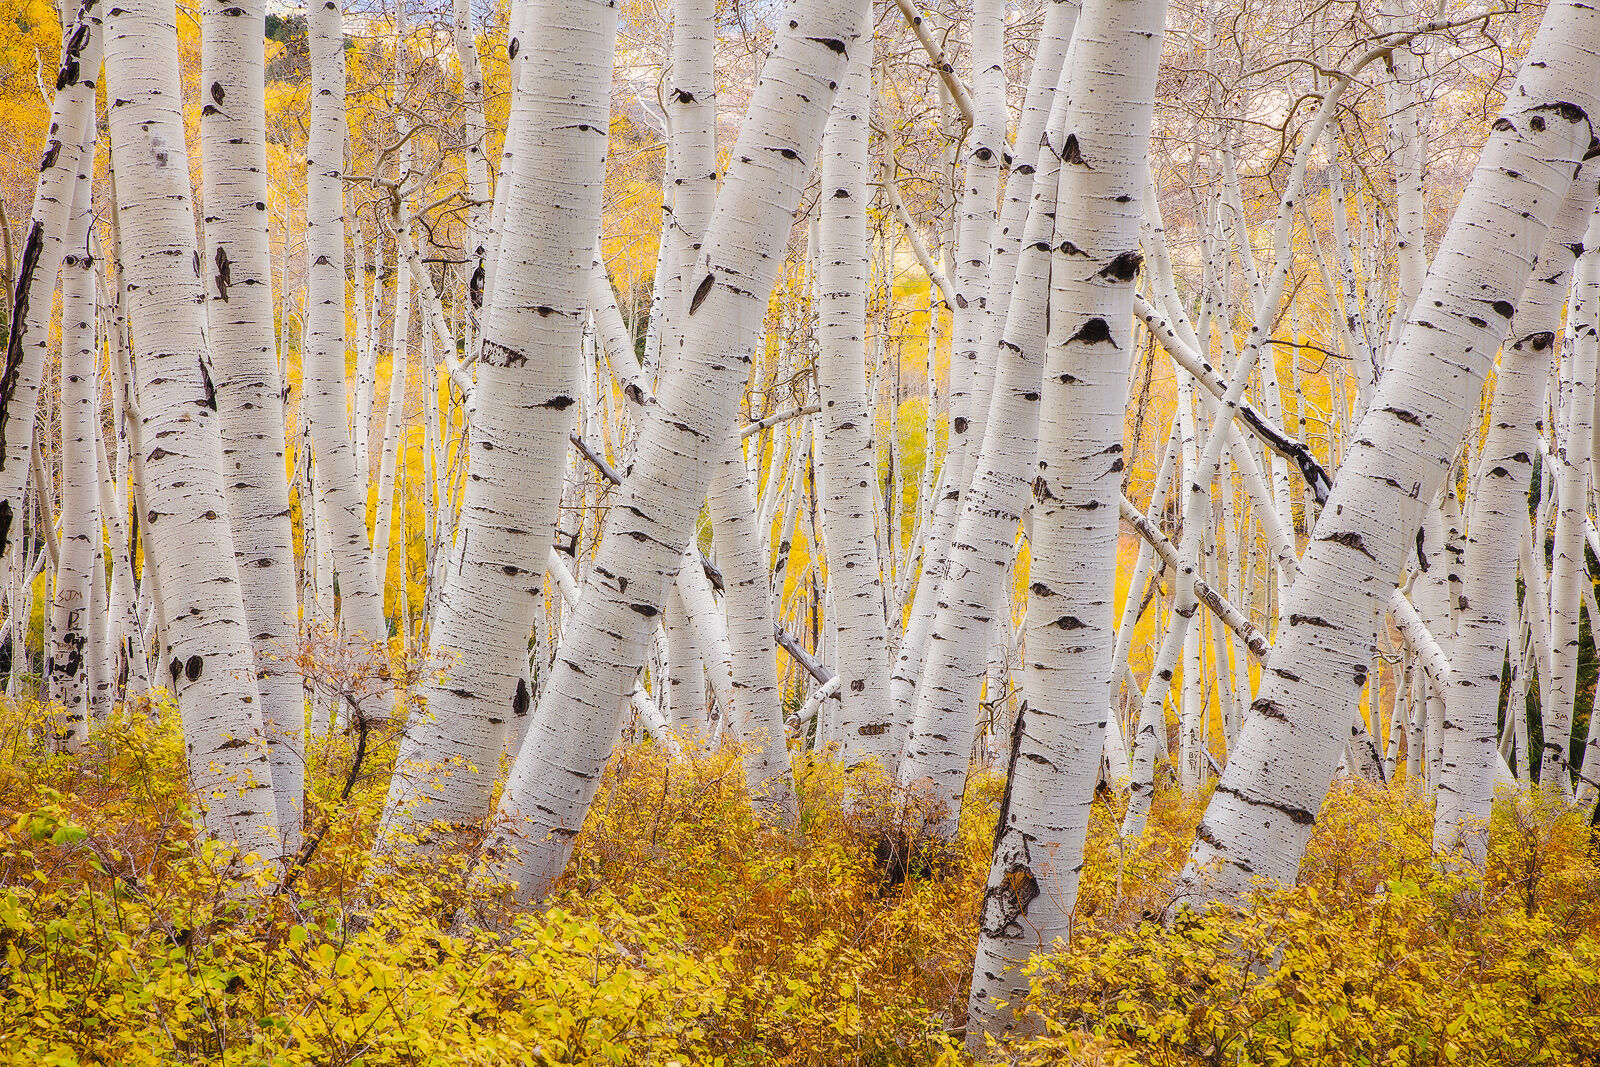 Aspen trees in fall colors of yellow and orange grow in all directions tilting back and forth.